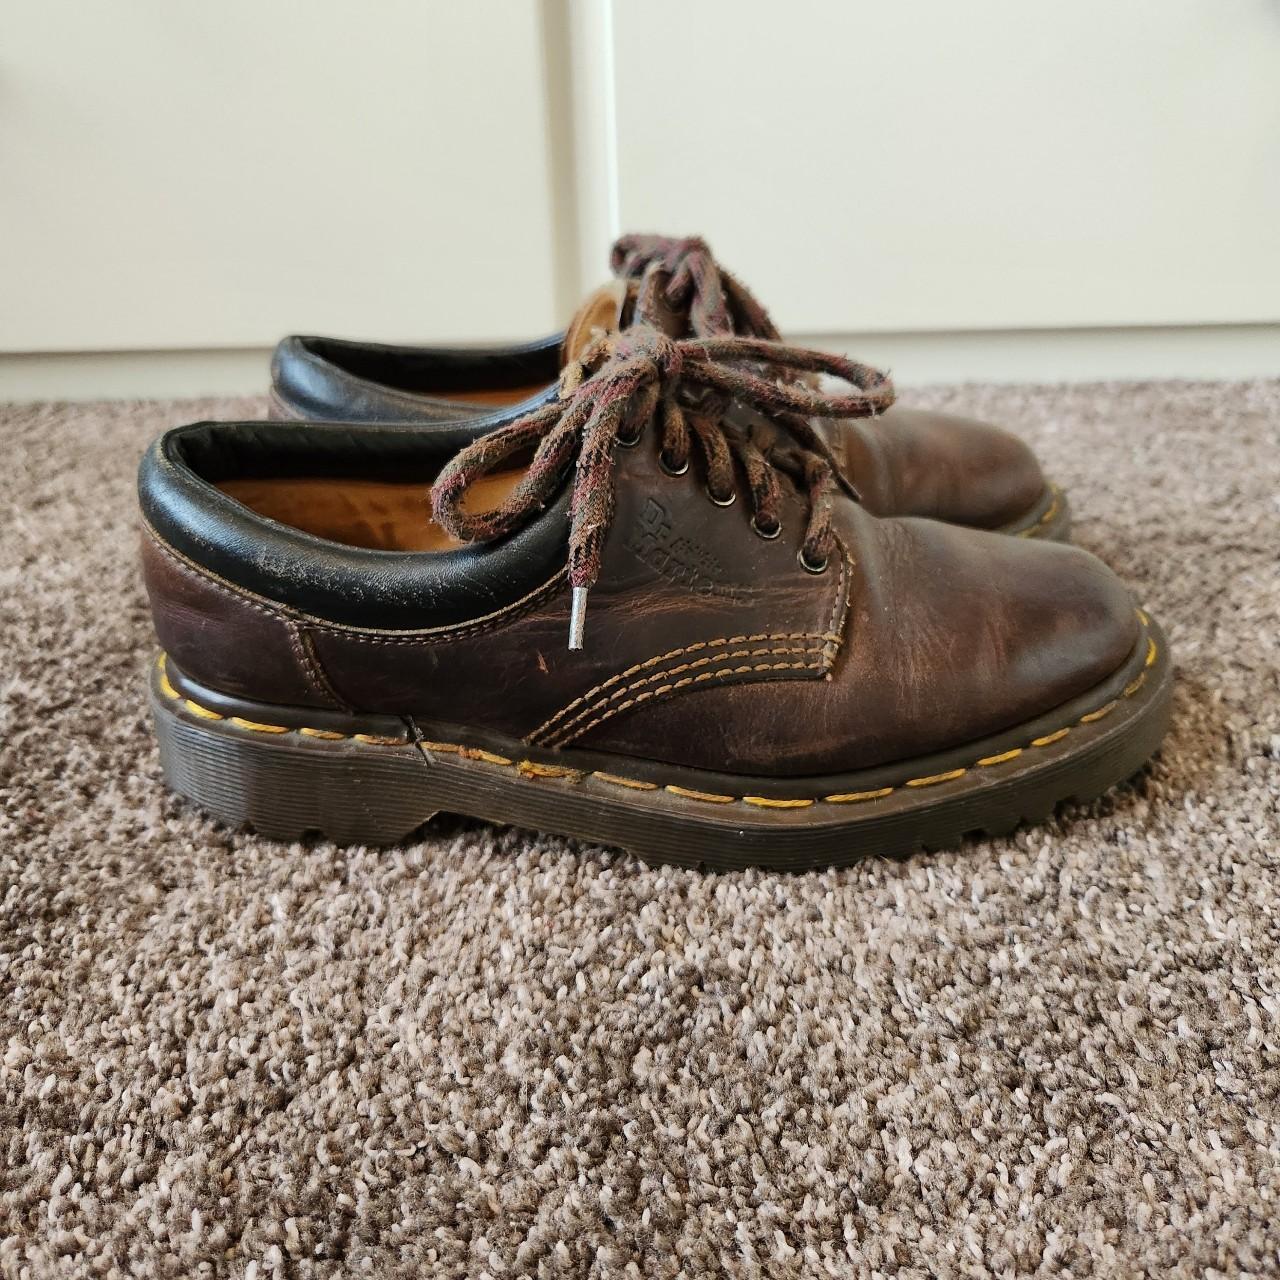 Dr. Martens Women's Black and Brown Trainers (5)